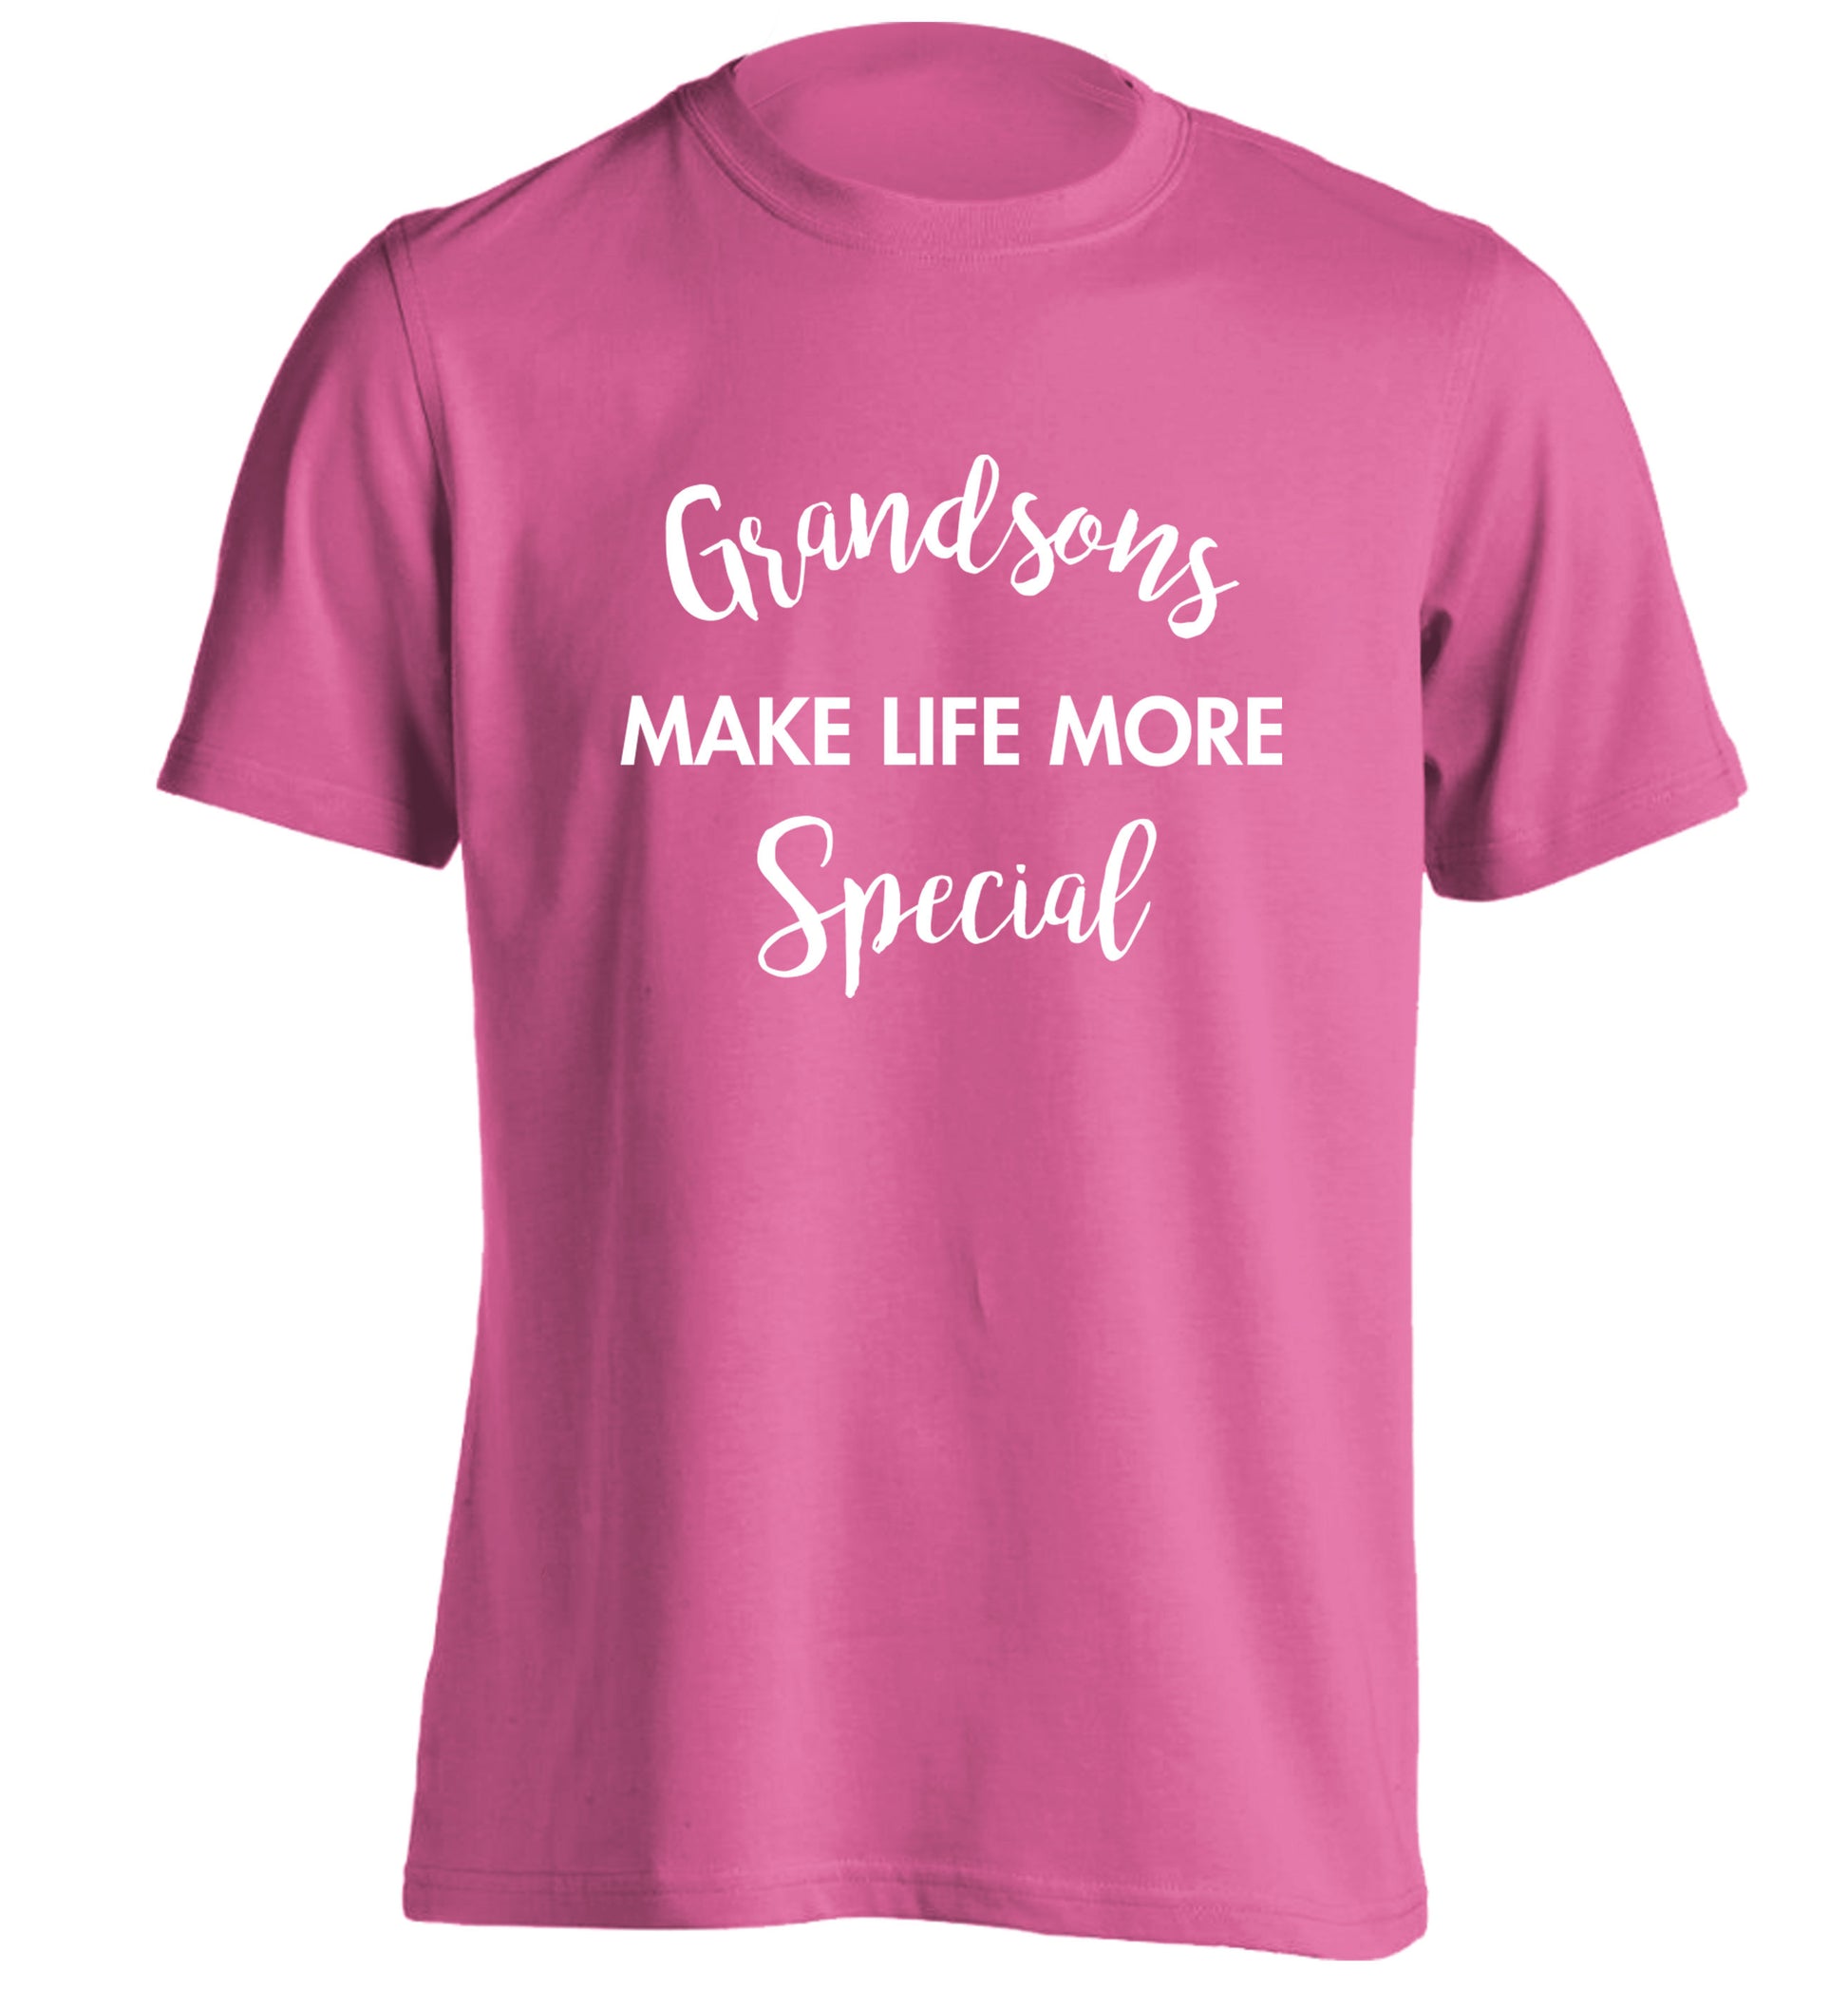 Grandsons make life more special adults unisex pink Tshirt 2XL